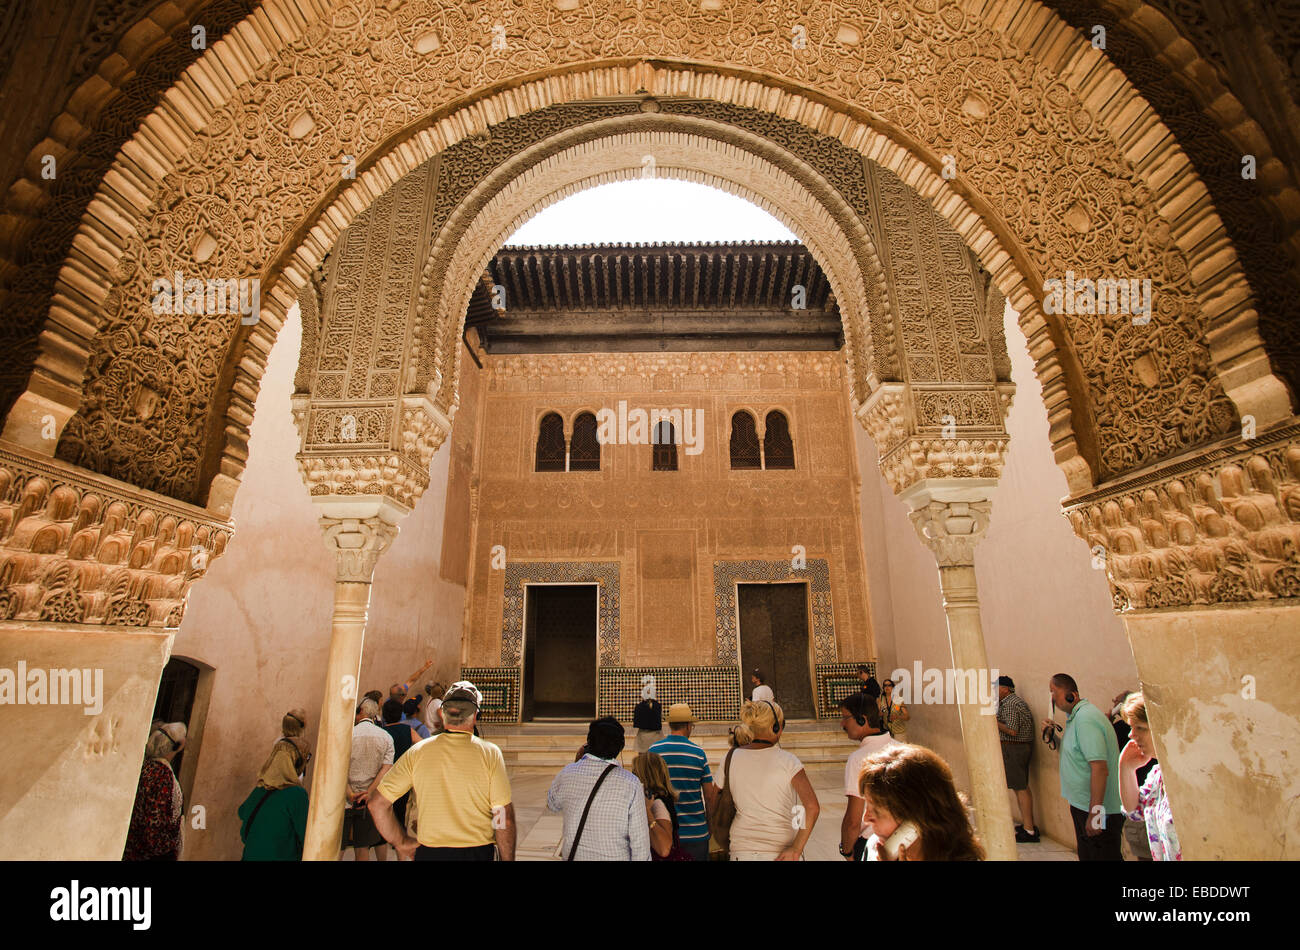 Alhambra Andalusia arch architecture art building built structure color image Comares Council Chamber courtyard cuarto day Stock Photo